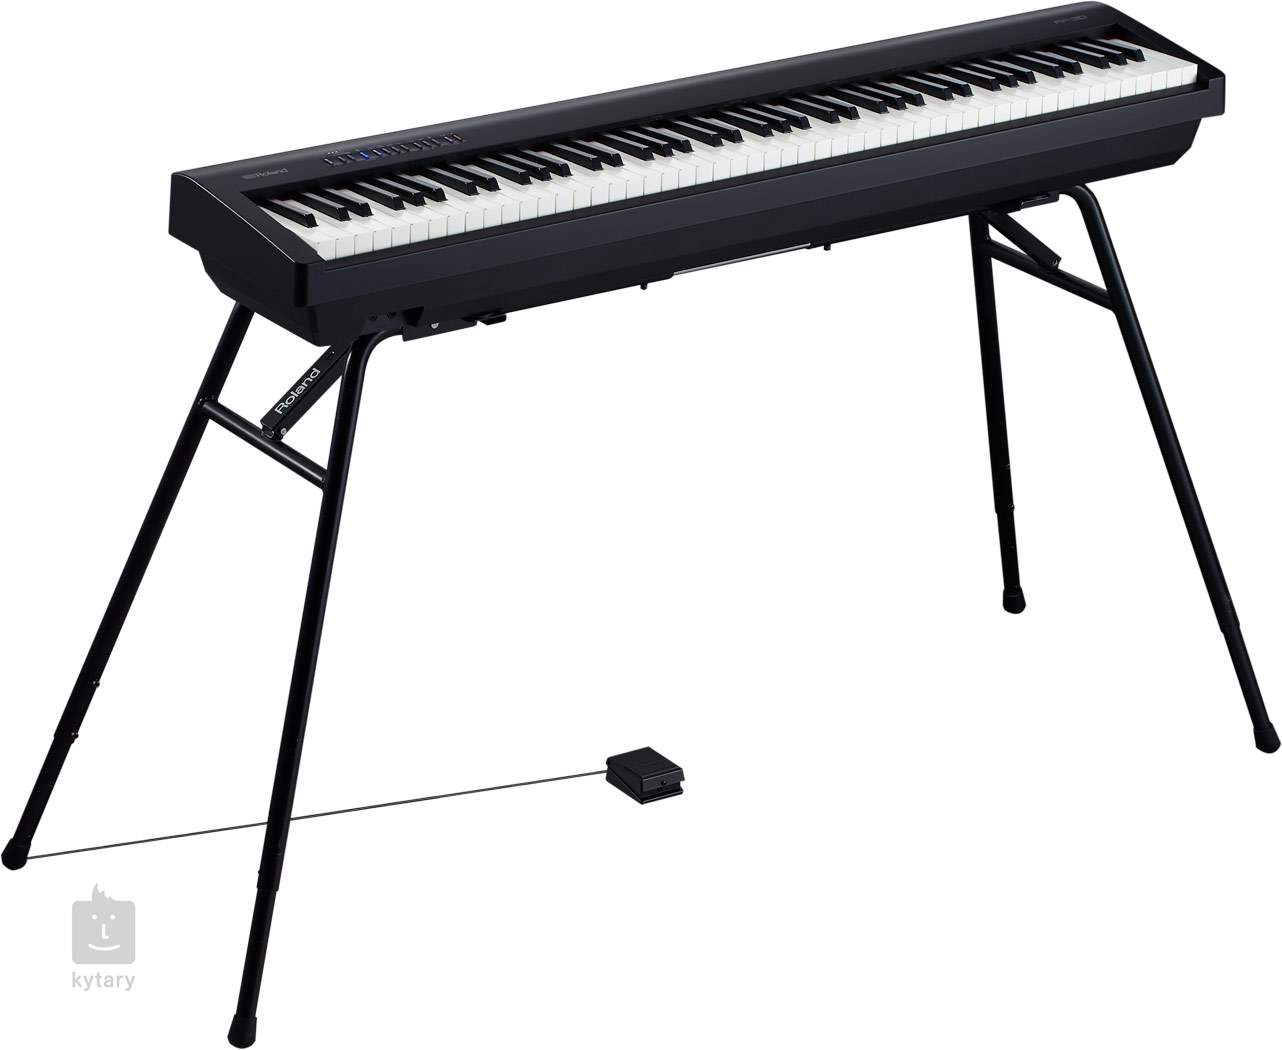 Roland Fp 30 Bk Portable Digital Stage Piano